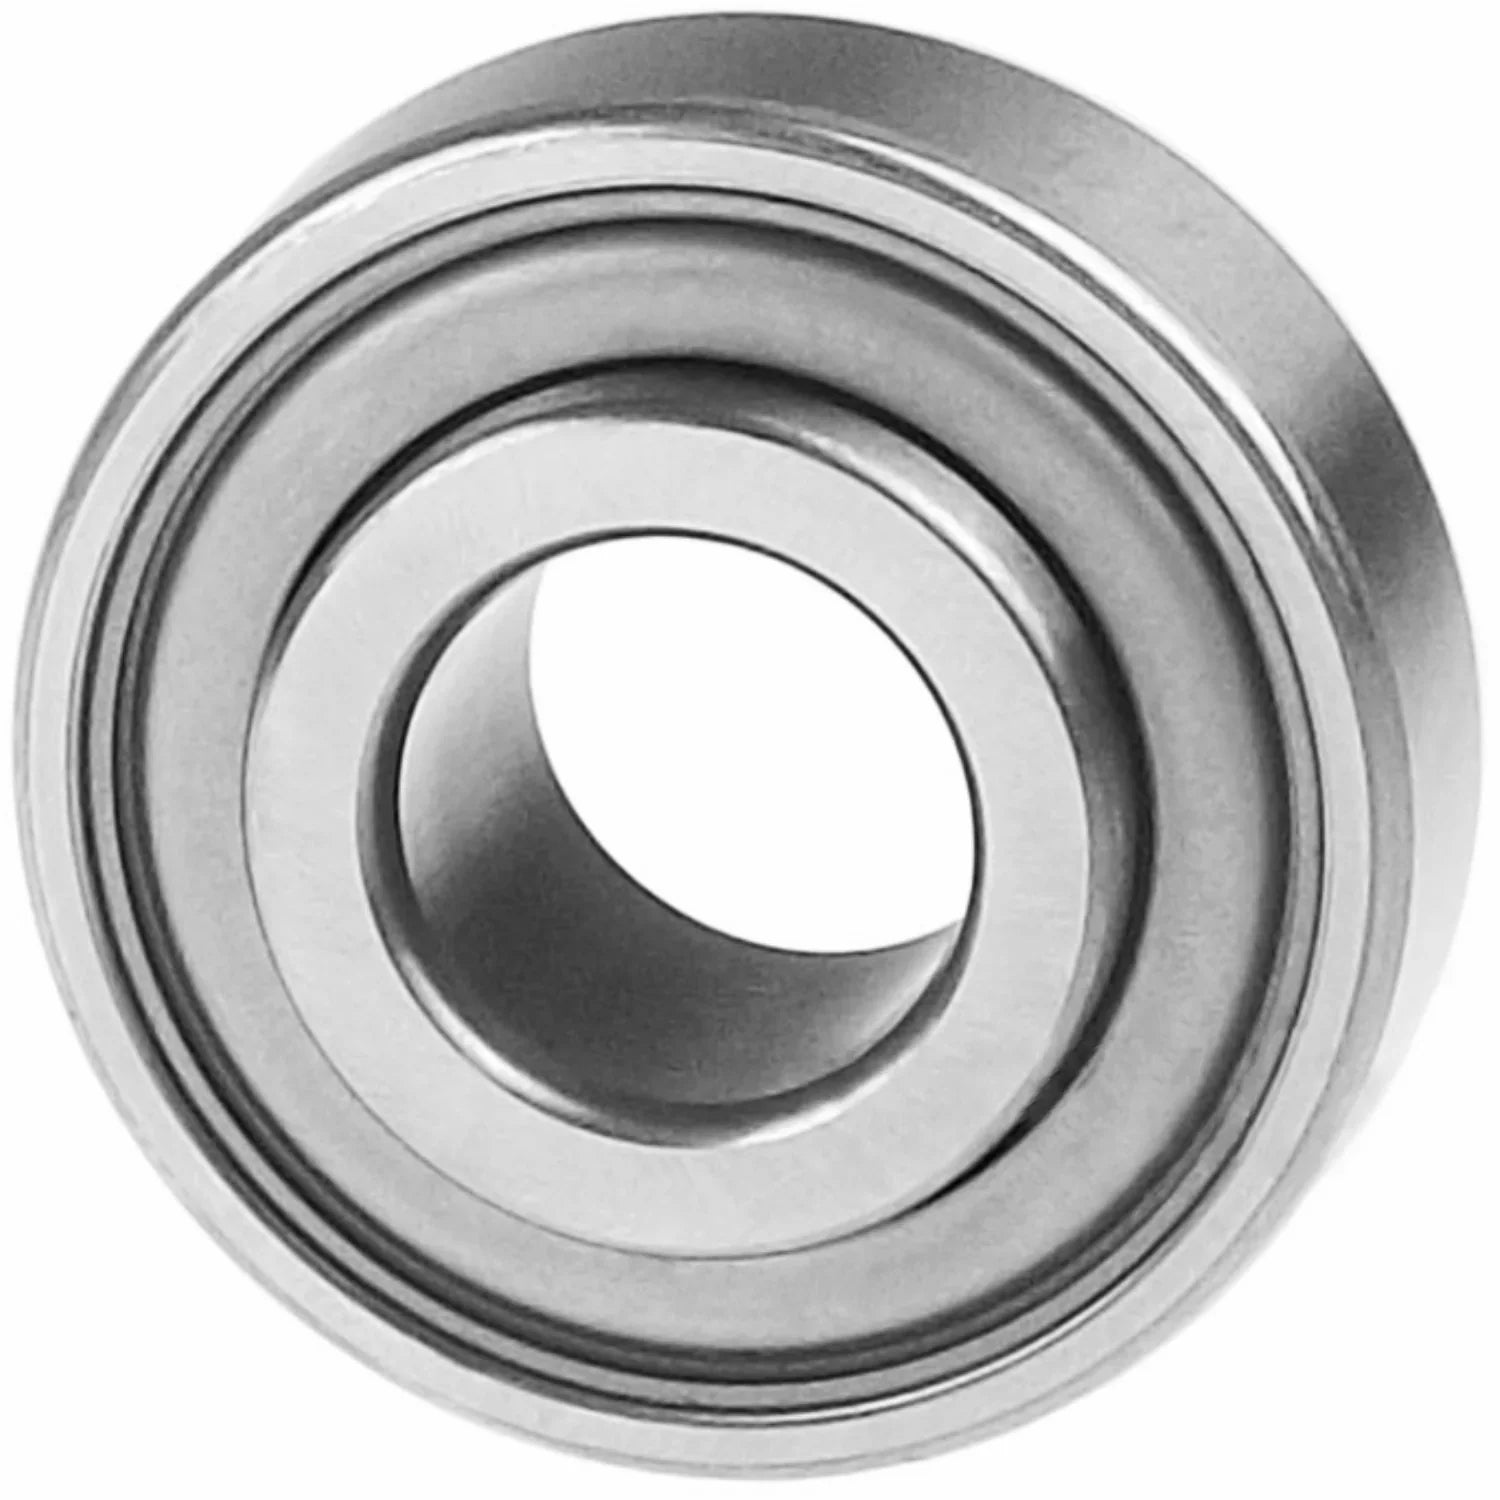 203KRR3 Special Agricultural Bearing 0.628